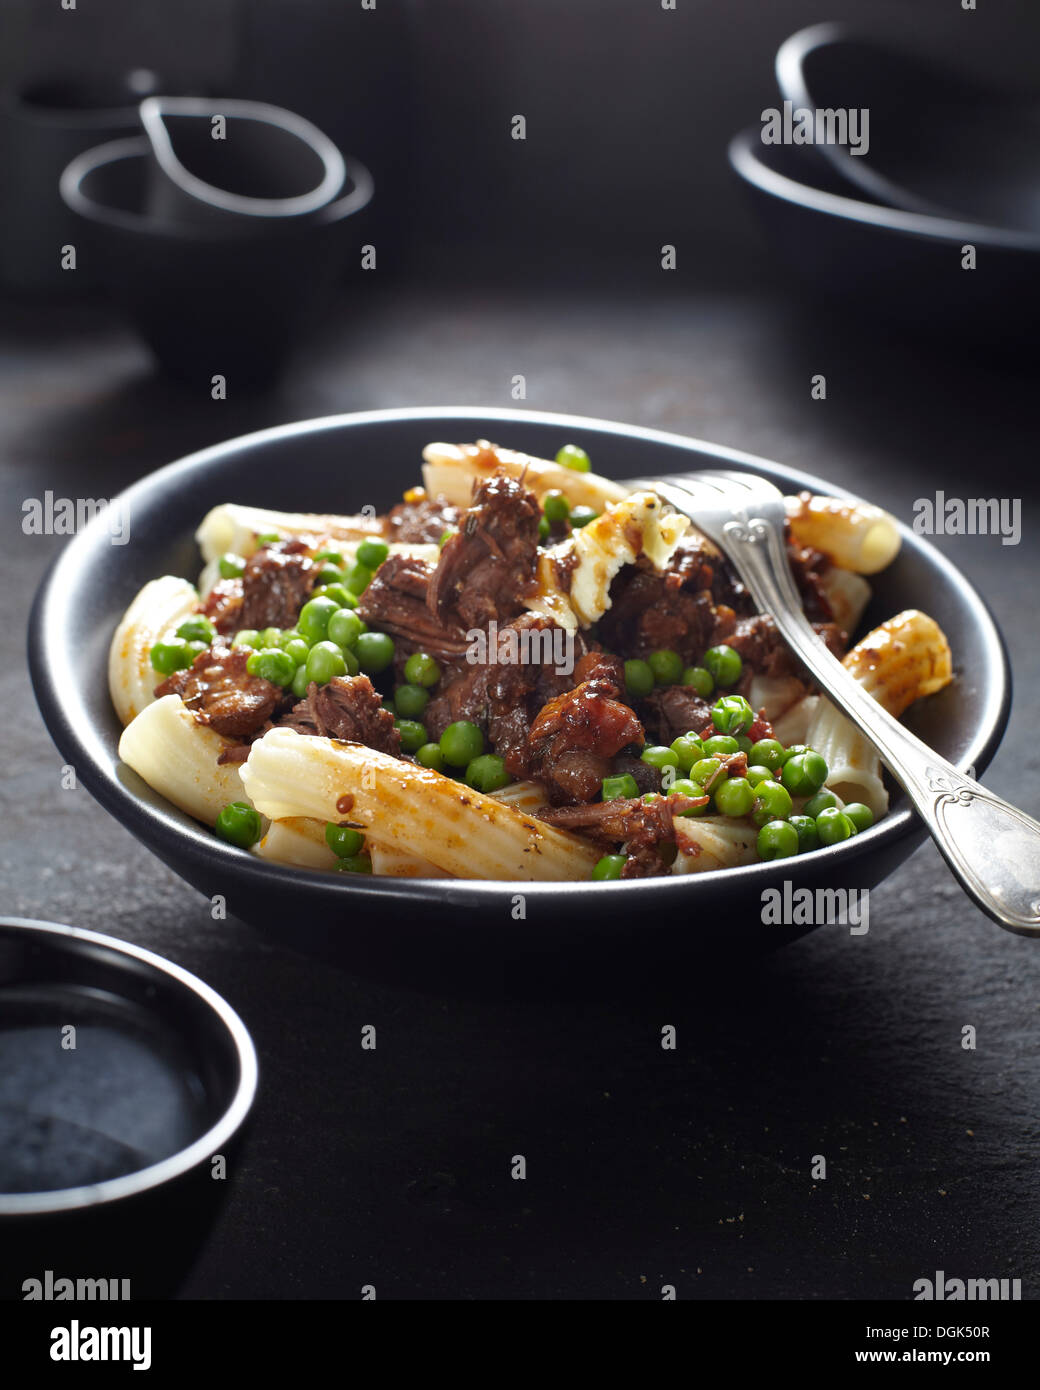 Pasta dish with meat and peas Stock Photo